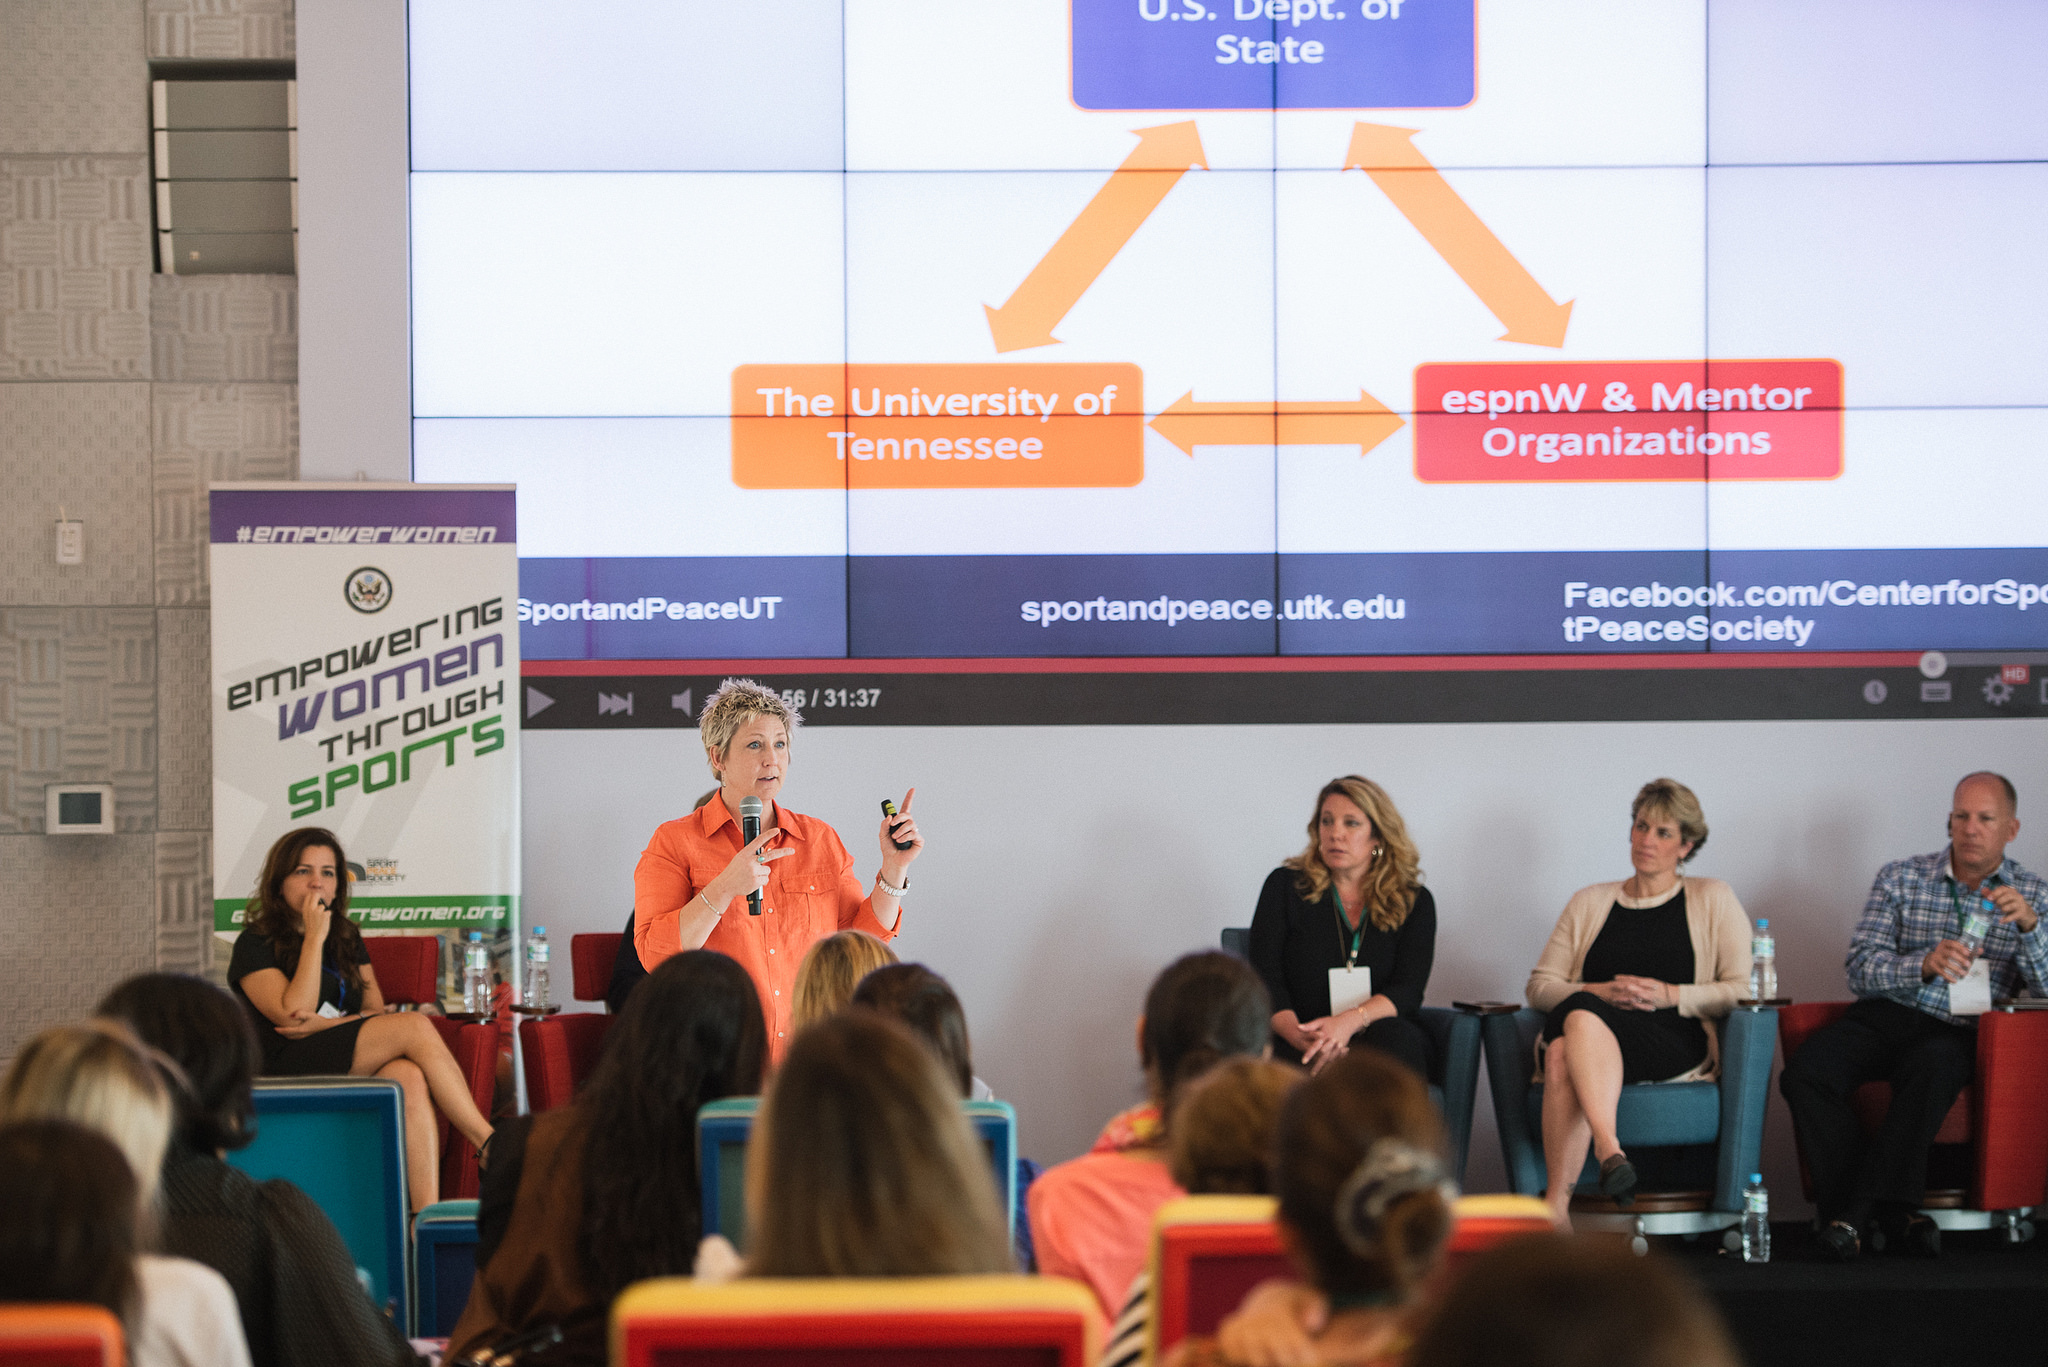 CSPS Director Sarah Hillyer speaks at an event for businesswomen hosted at Google’s offices in Sao Paulo, Brazil